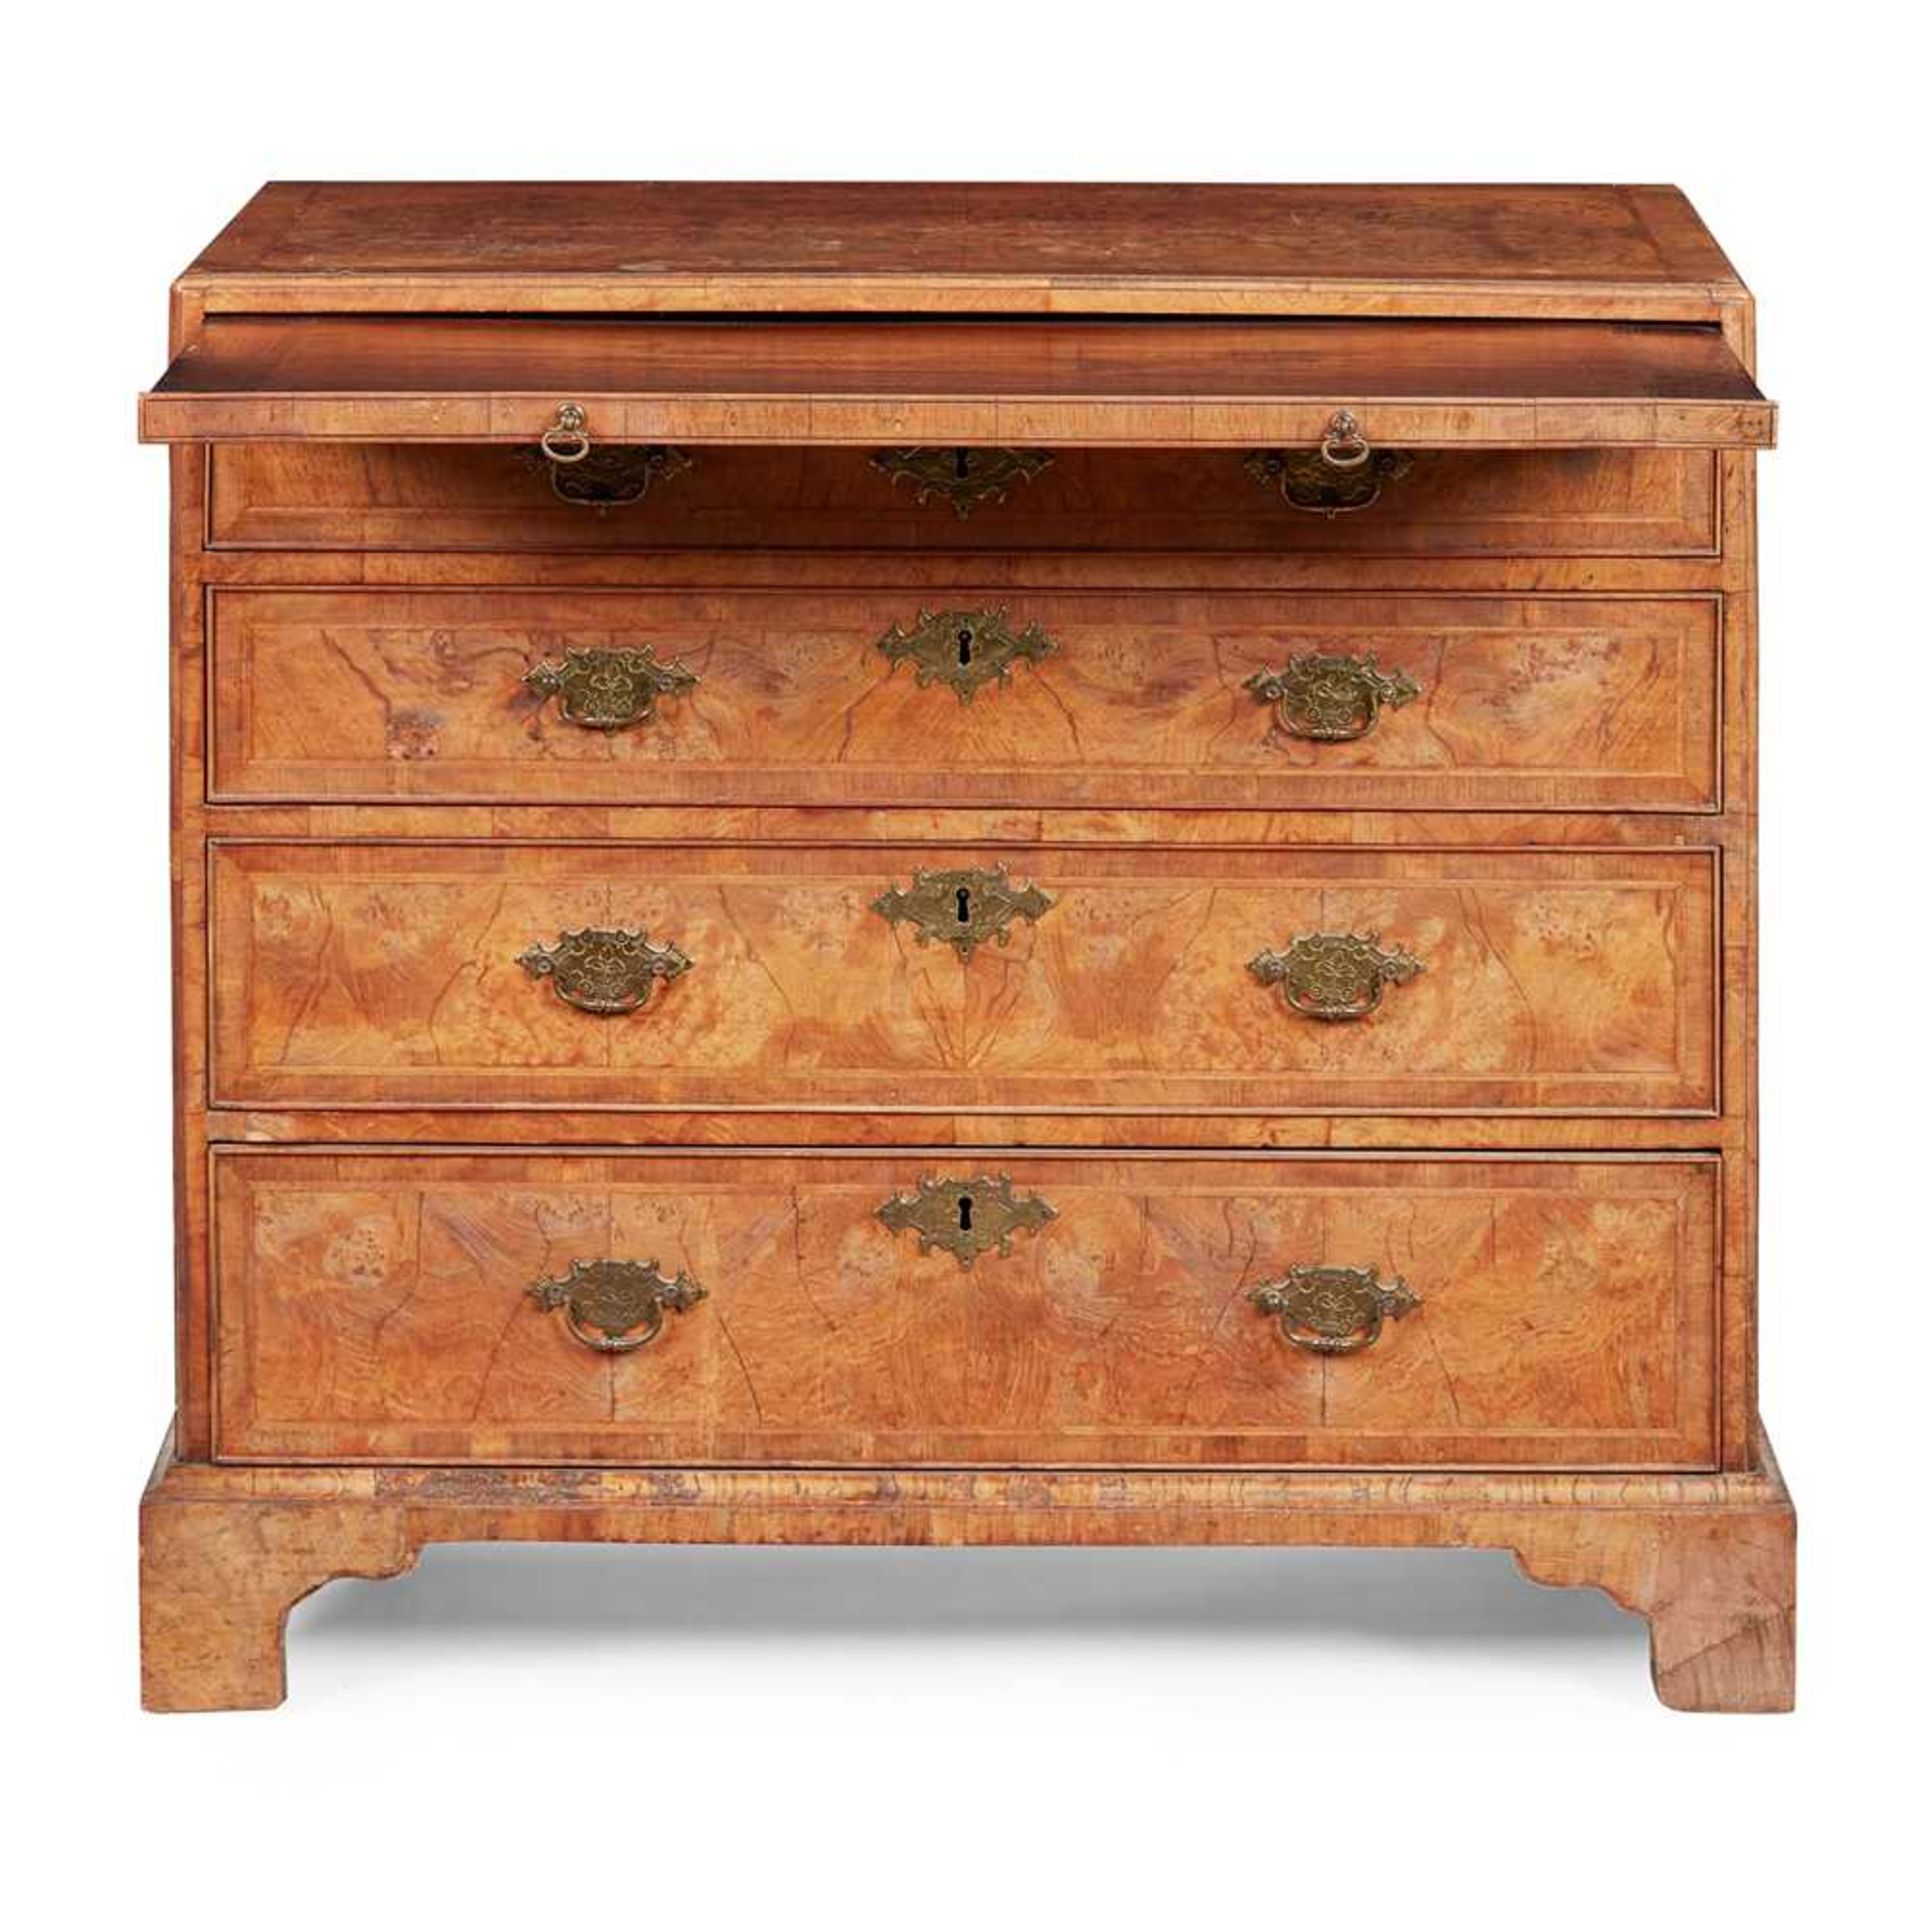 GEORGE I WALNUT CHEST OF DRAWERS EARLY 18TH CENTURY, WITH ALTERATIONS - Image 2 of 4